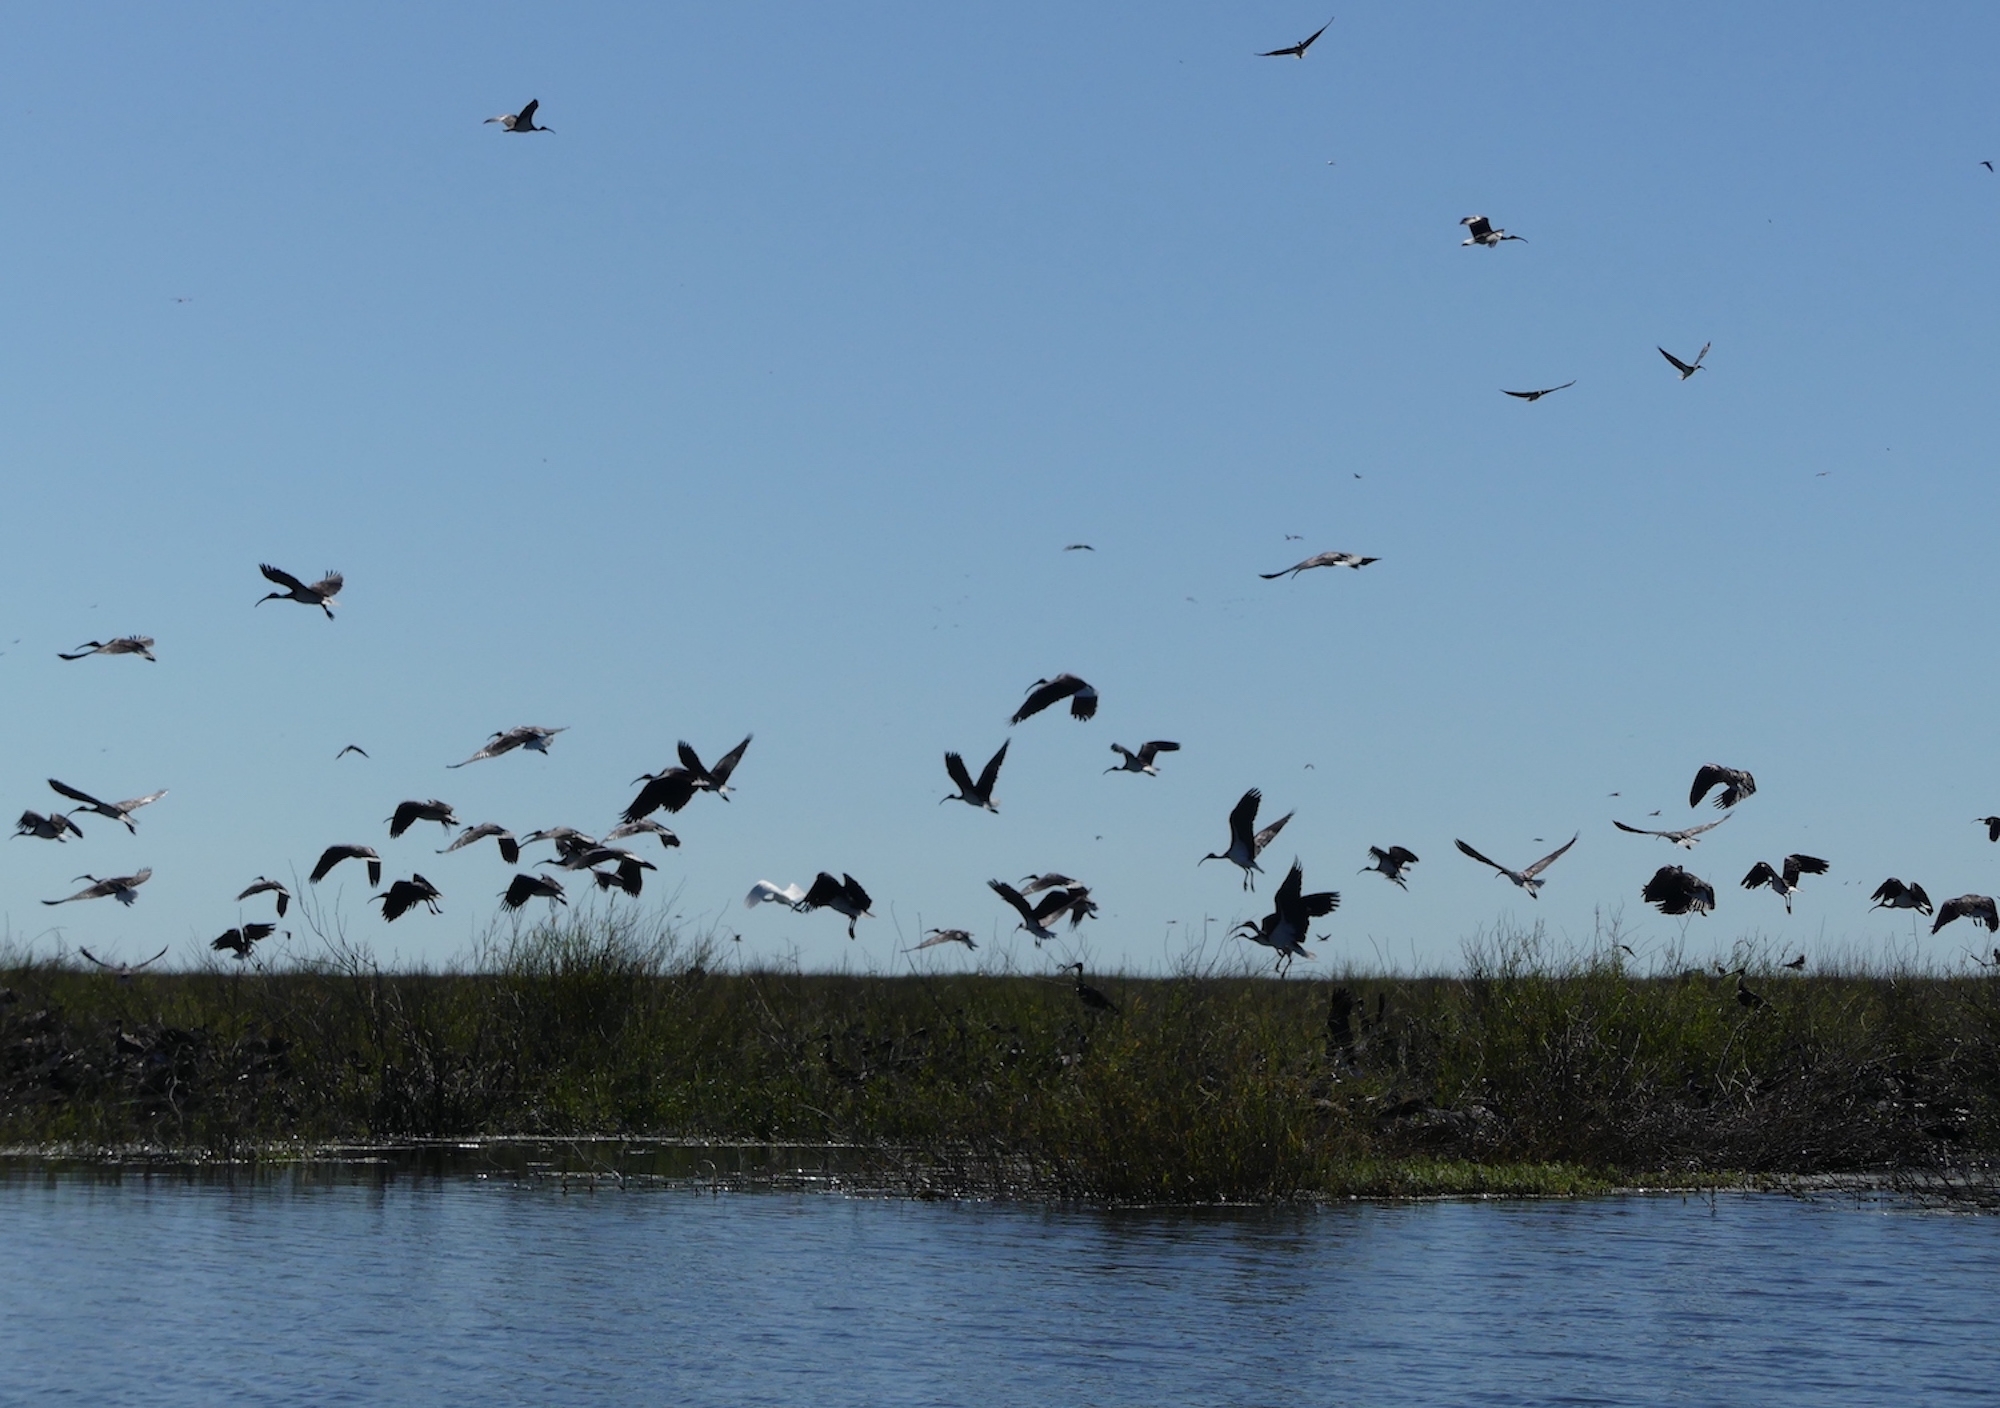 Waterbirds at the Gayini Wetlands. Photographed with permission from the Nari Nari Tribal Council.